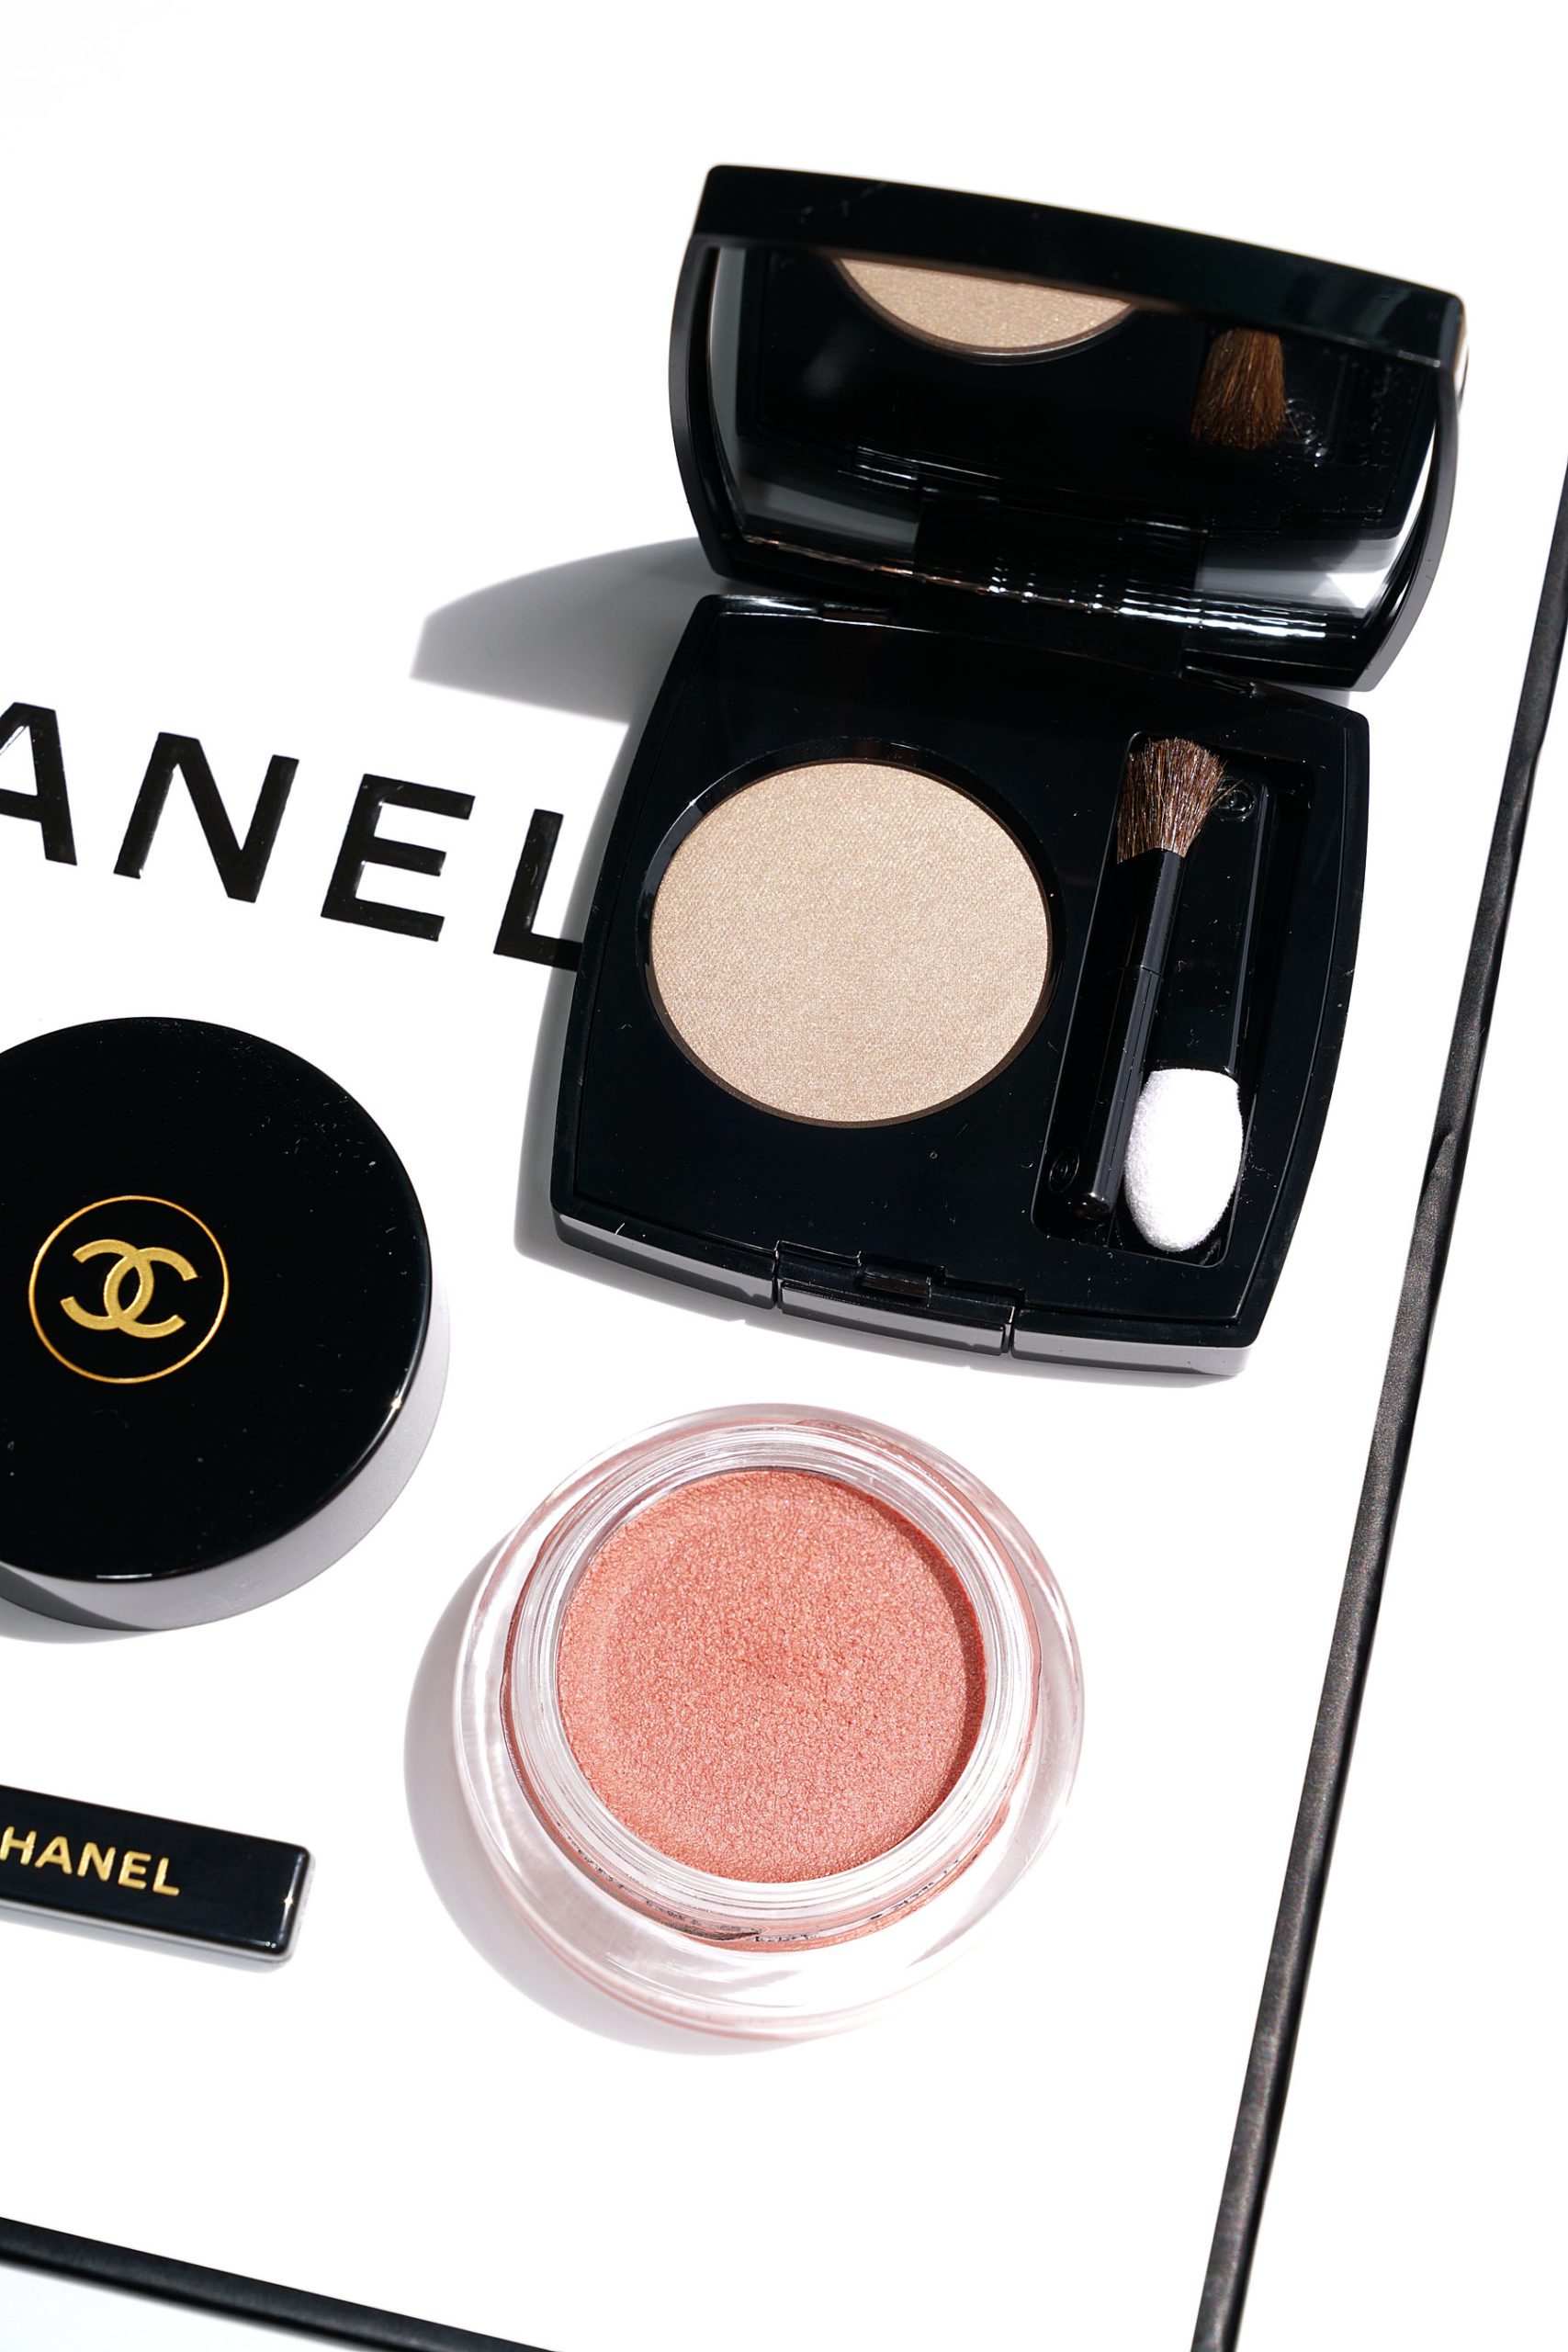 New Chanel Eye Makeup Review - The Beauty Look Book